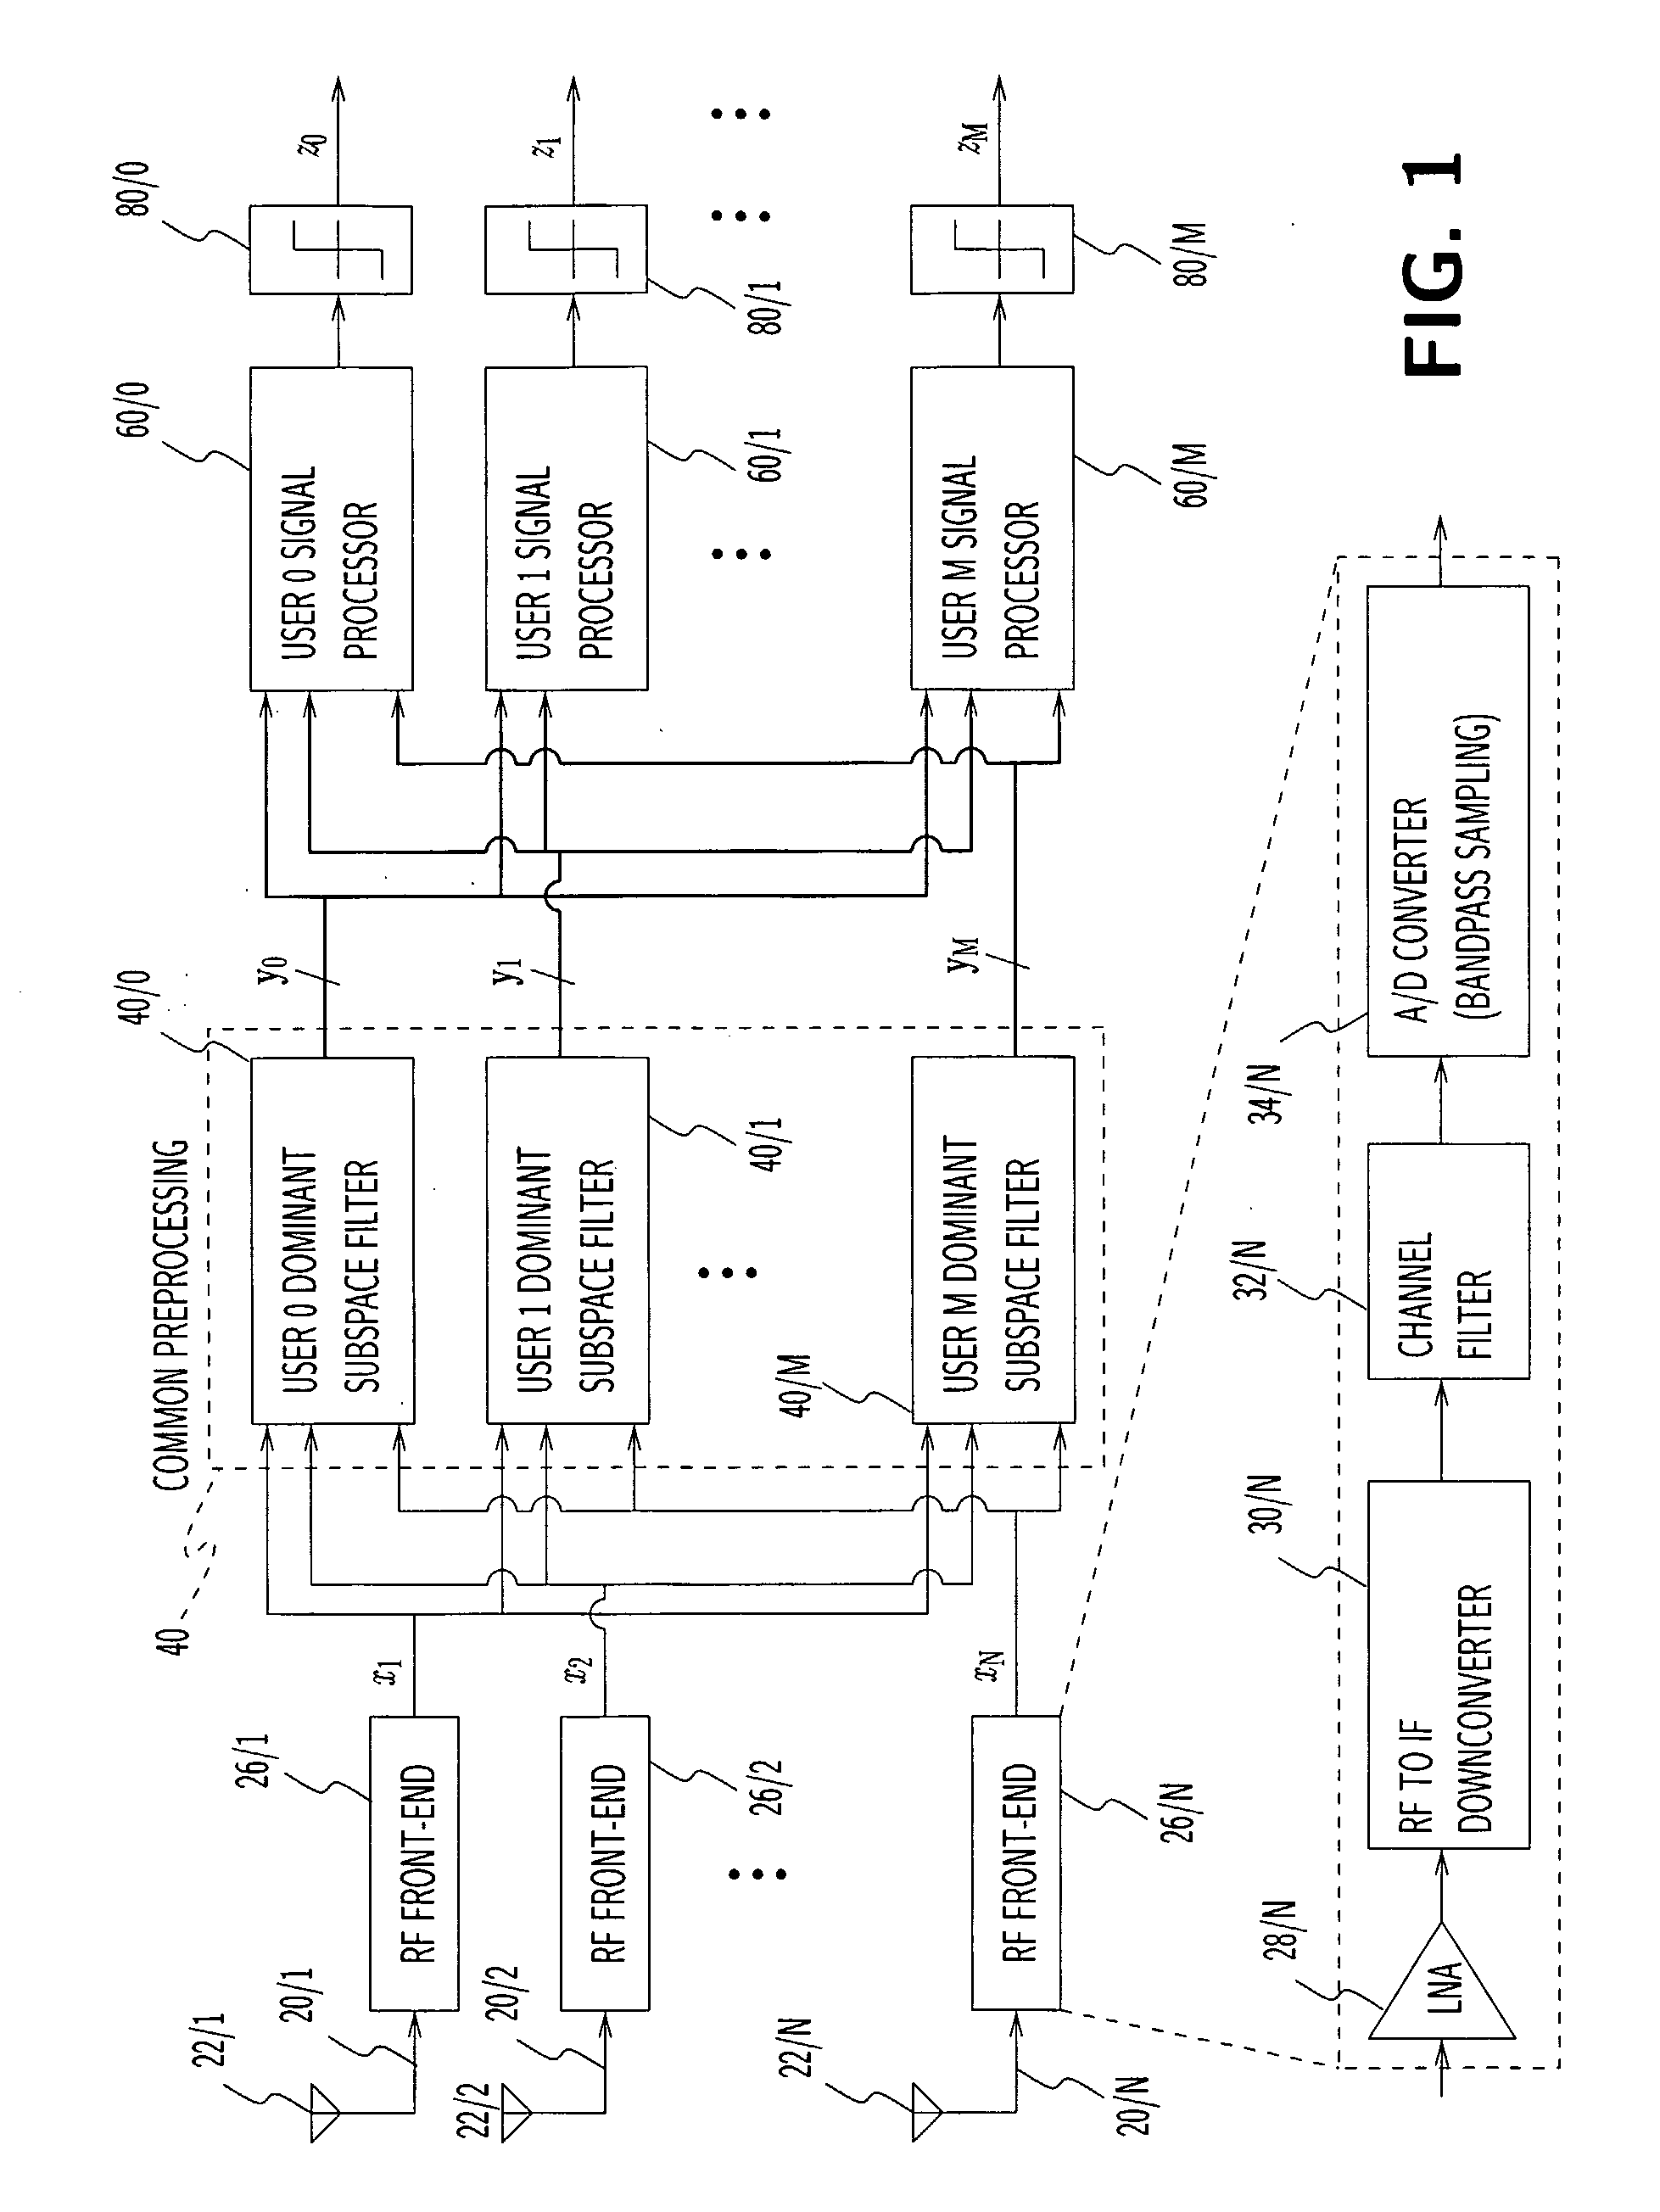 Multi-user adaptive array receiver and method